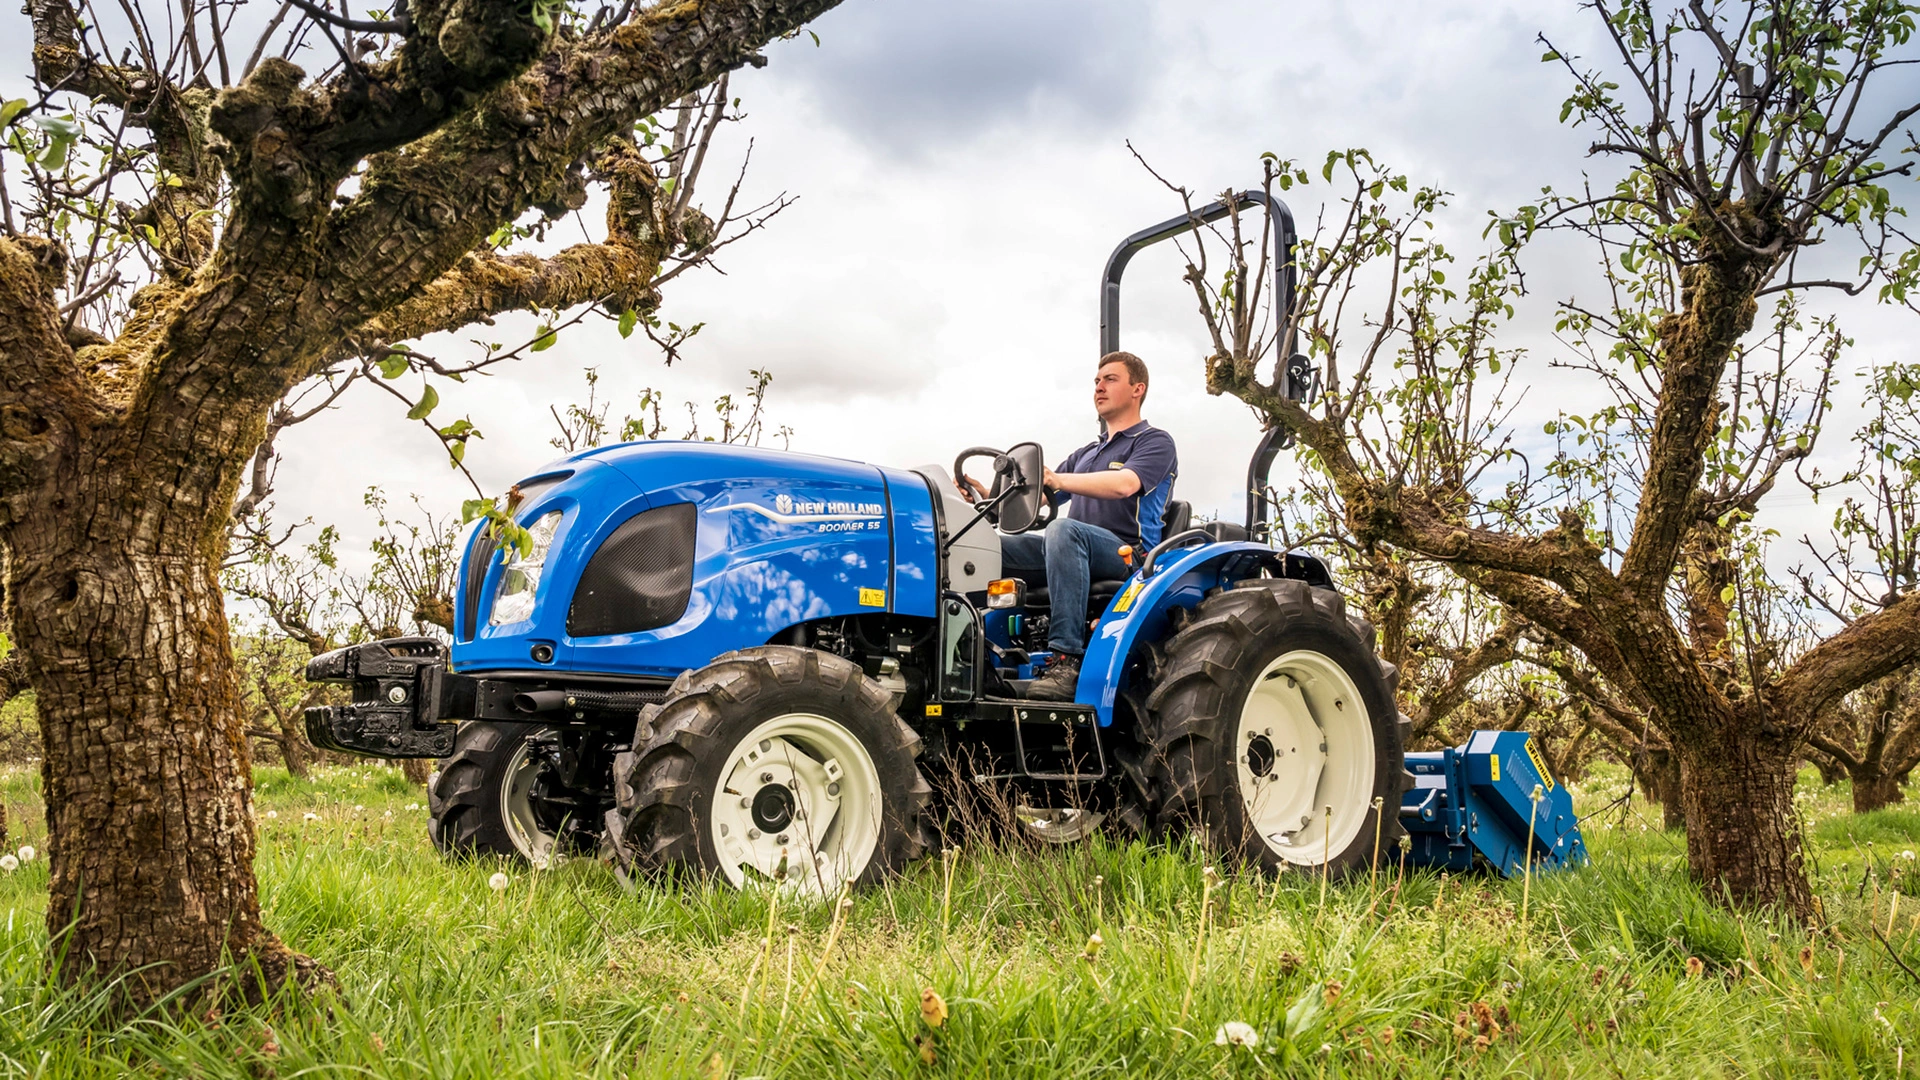 New Holland Boomer tractor in action